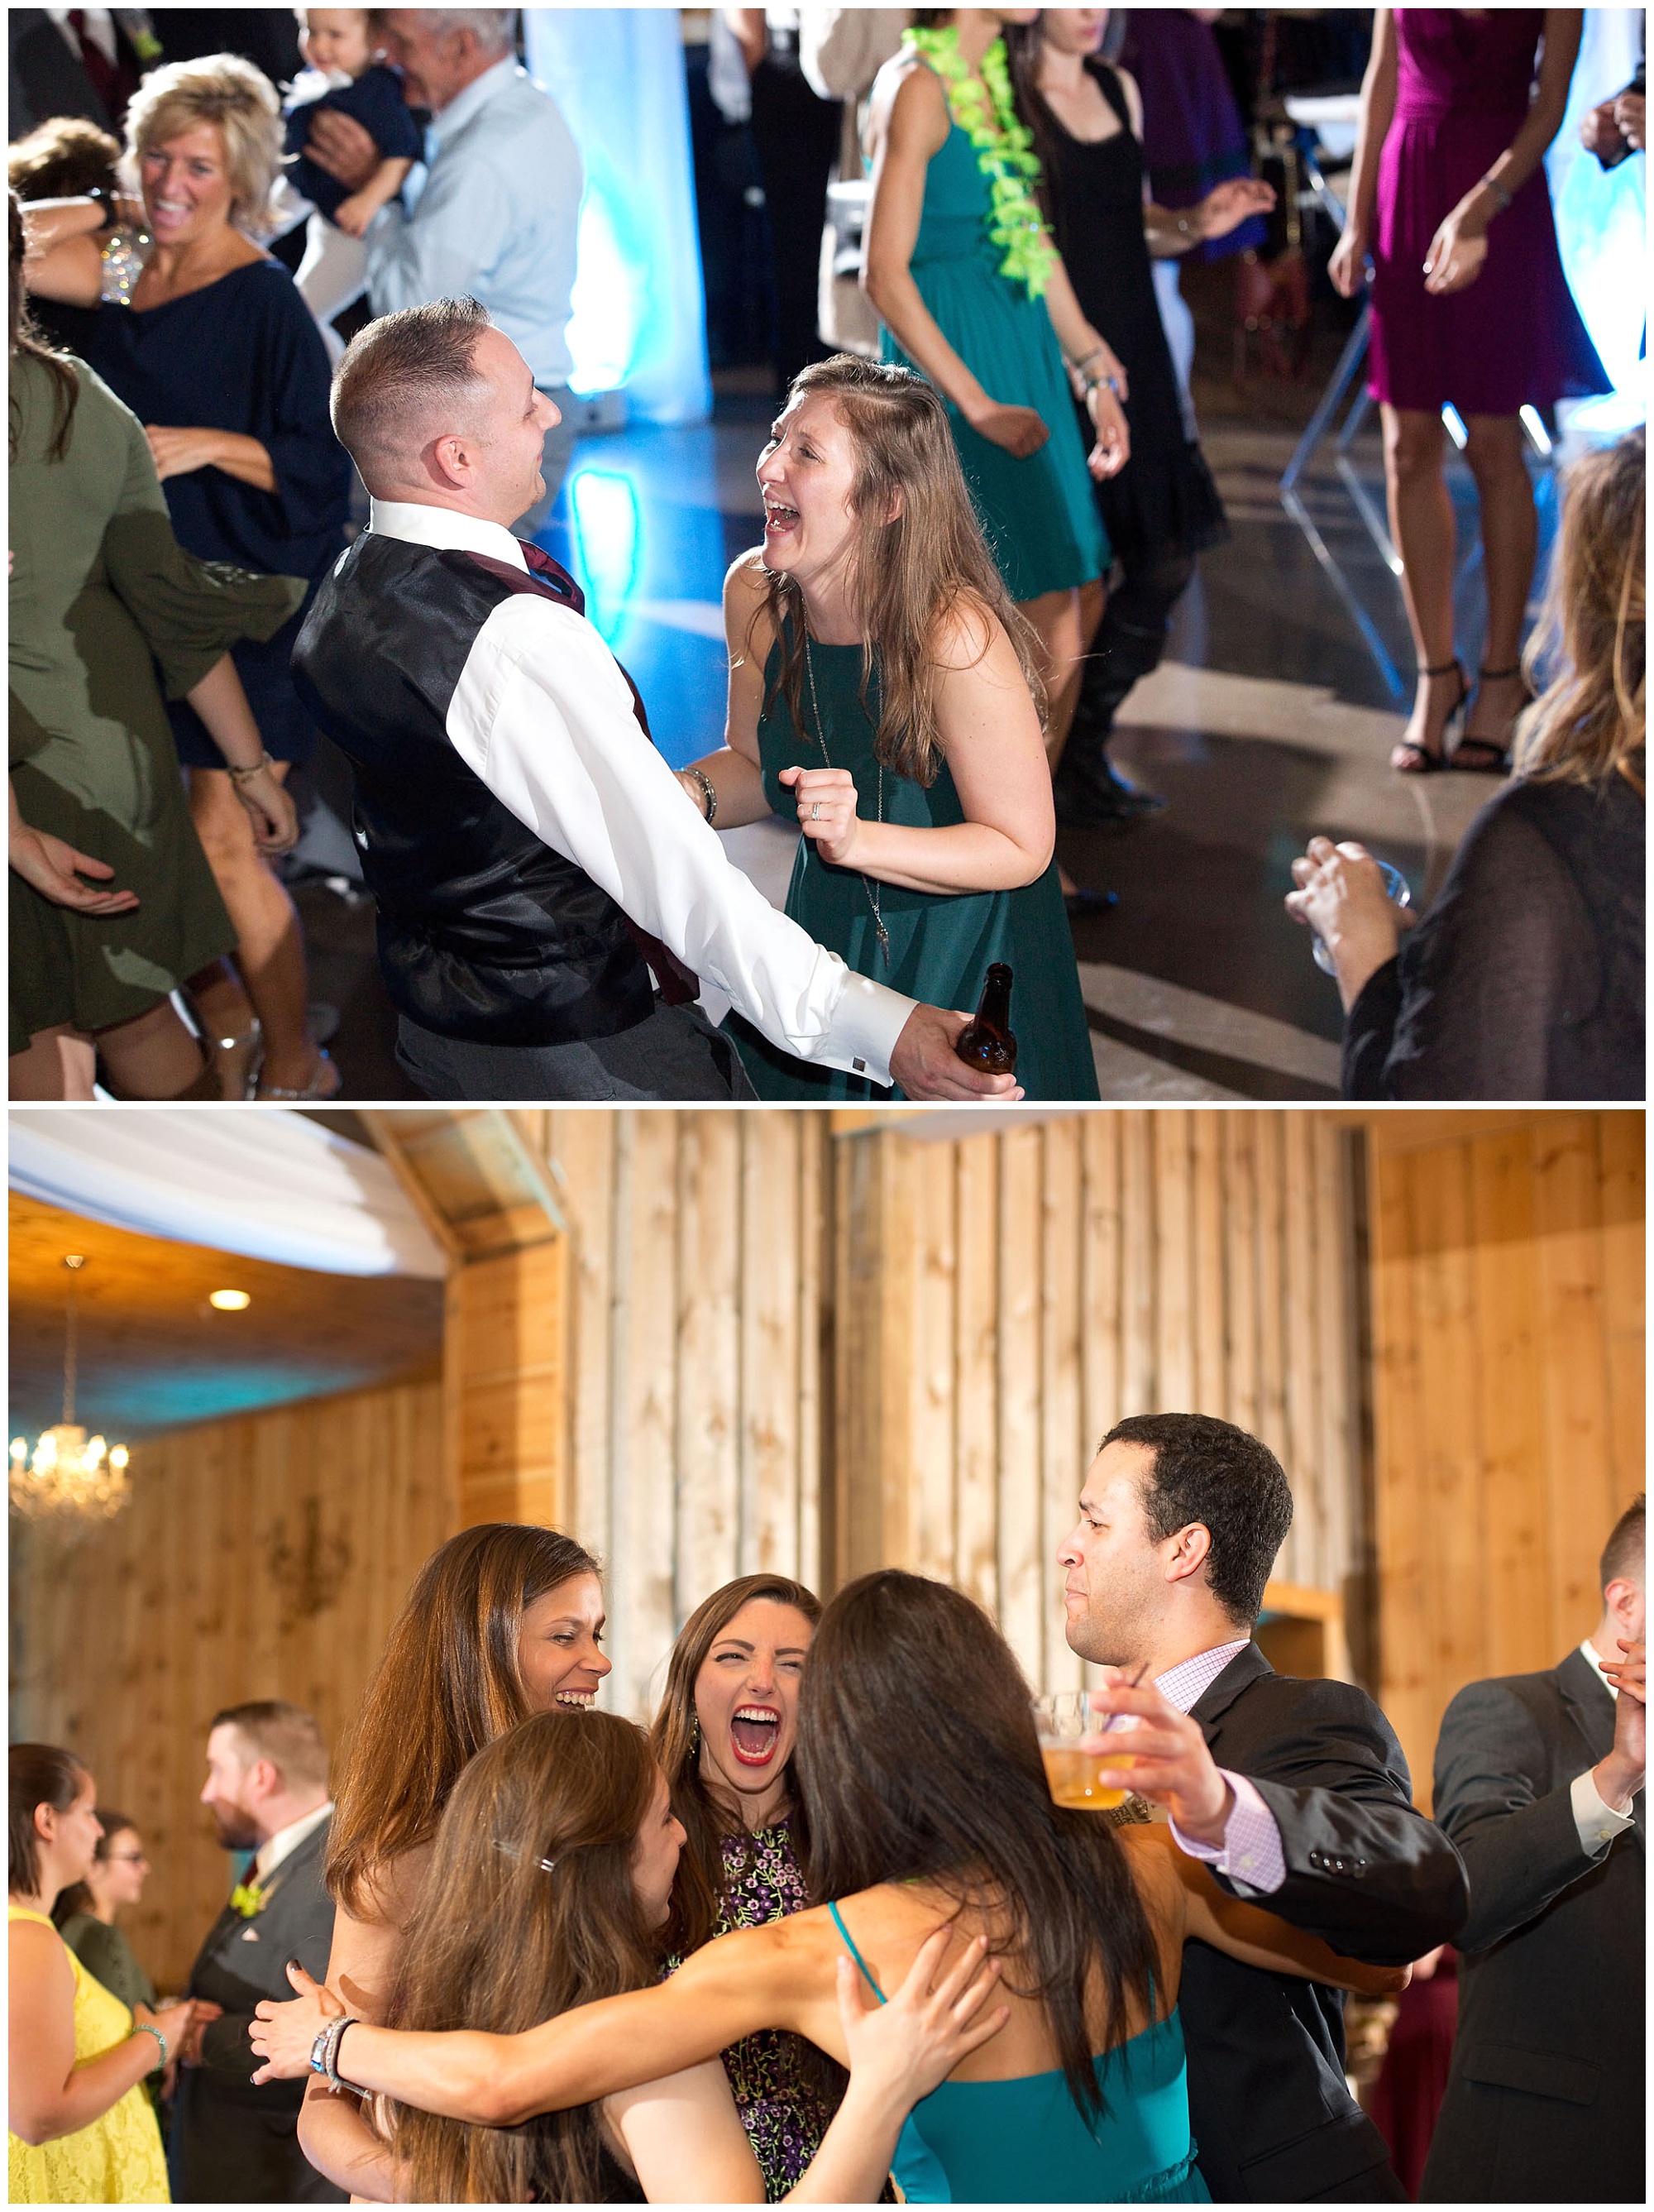 Photos of dancing family and guest at the wedding reception.